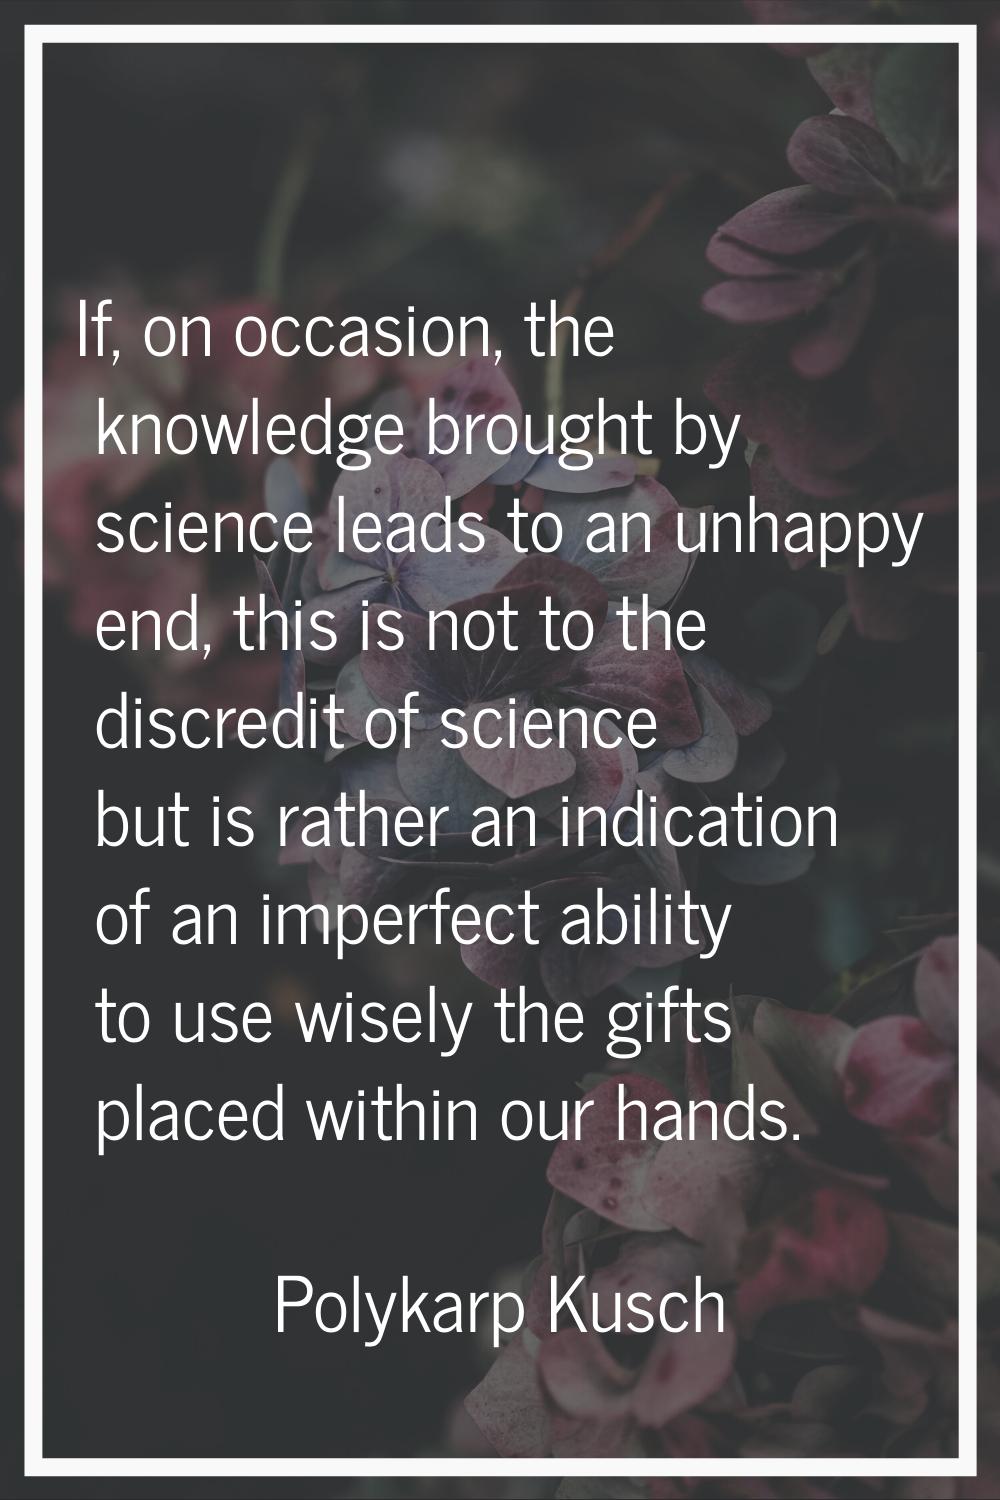 If, on occasion, the knowledge brought by science leads to an unhappy end, this is not to the discr